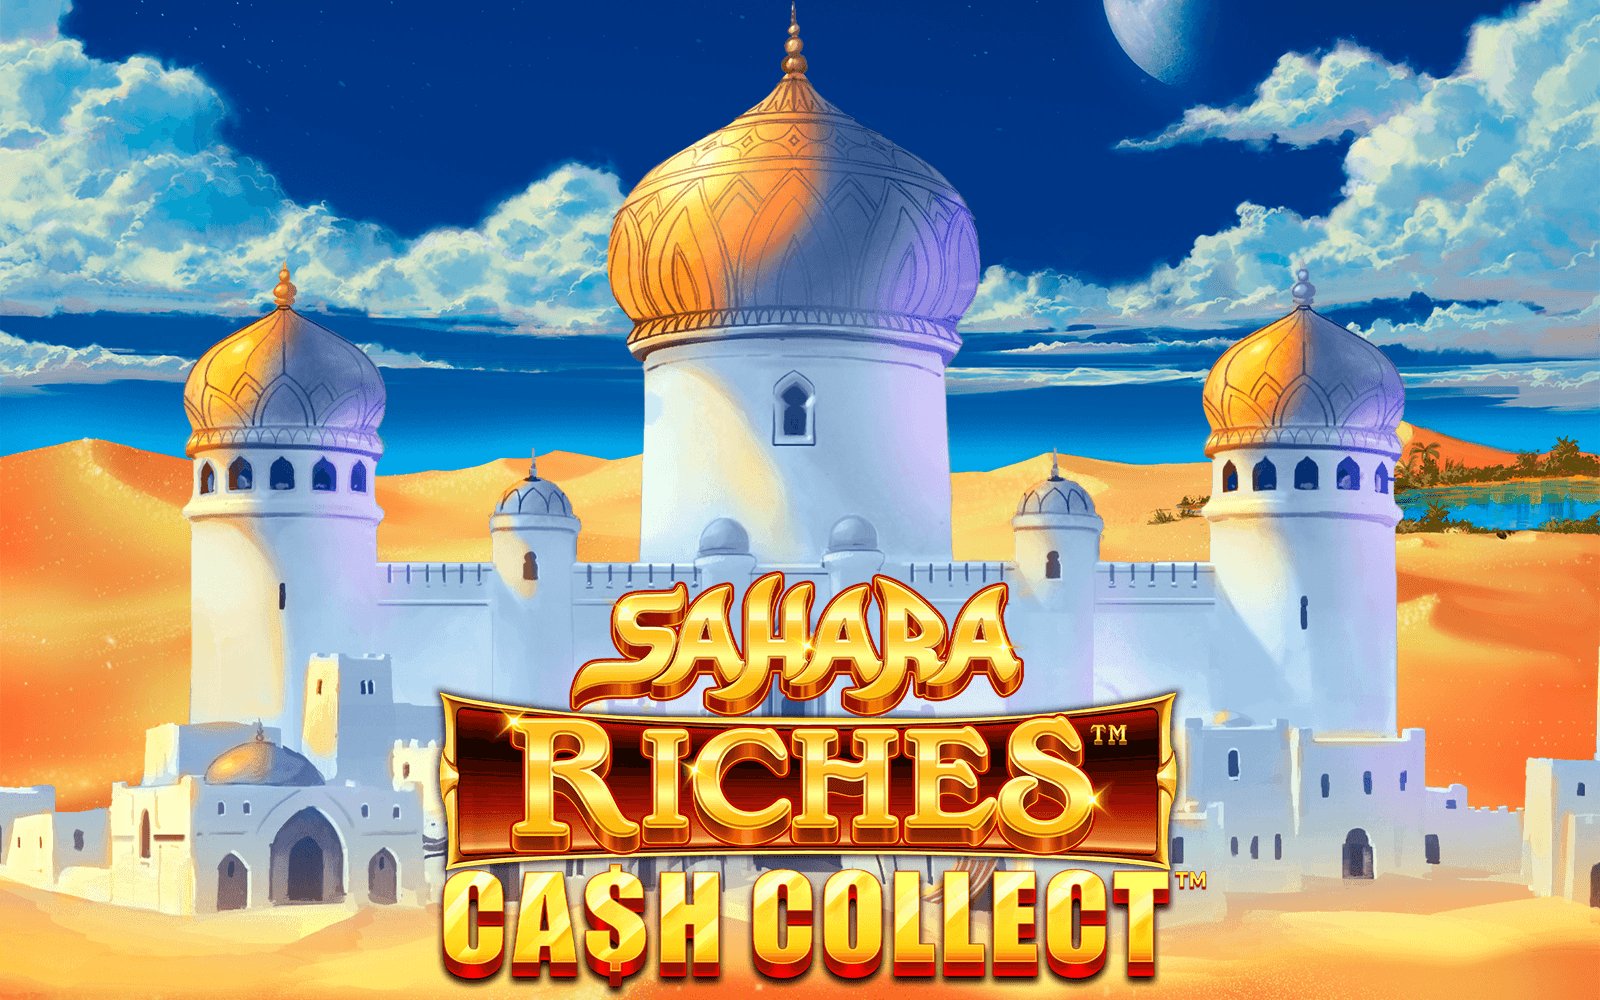 Play Sahara Riches: Cash Collect on Starcasino.be online casino